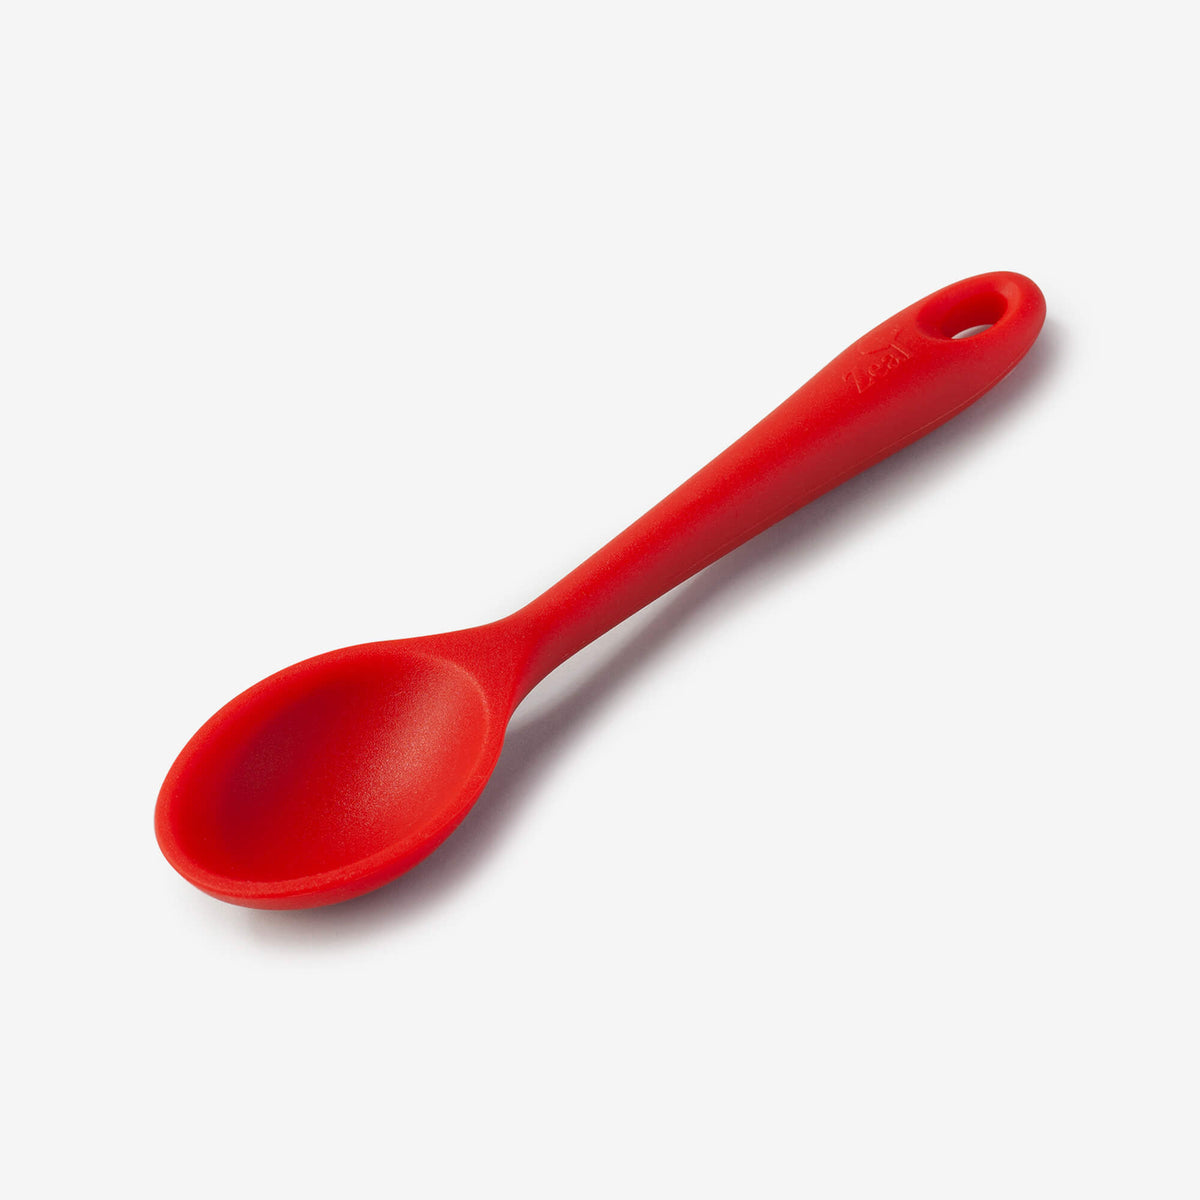 https://cdn.shopify.com/s/files/1/0614/9131/4841/products/j162-zeal-silicone-spoon-red_1200x.jpg?v=1659107311